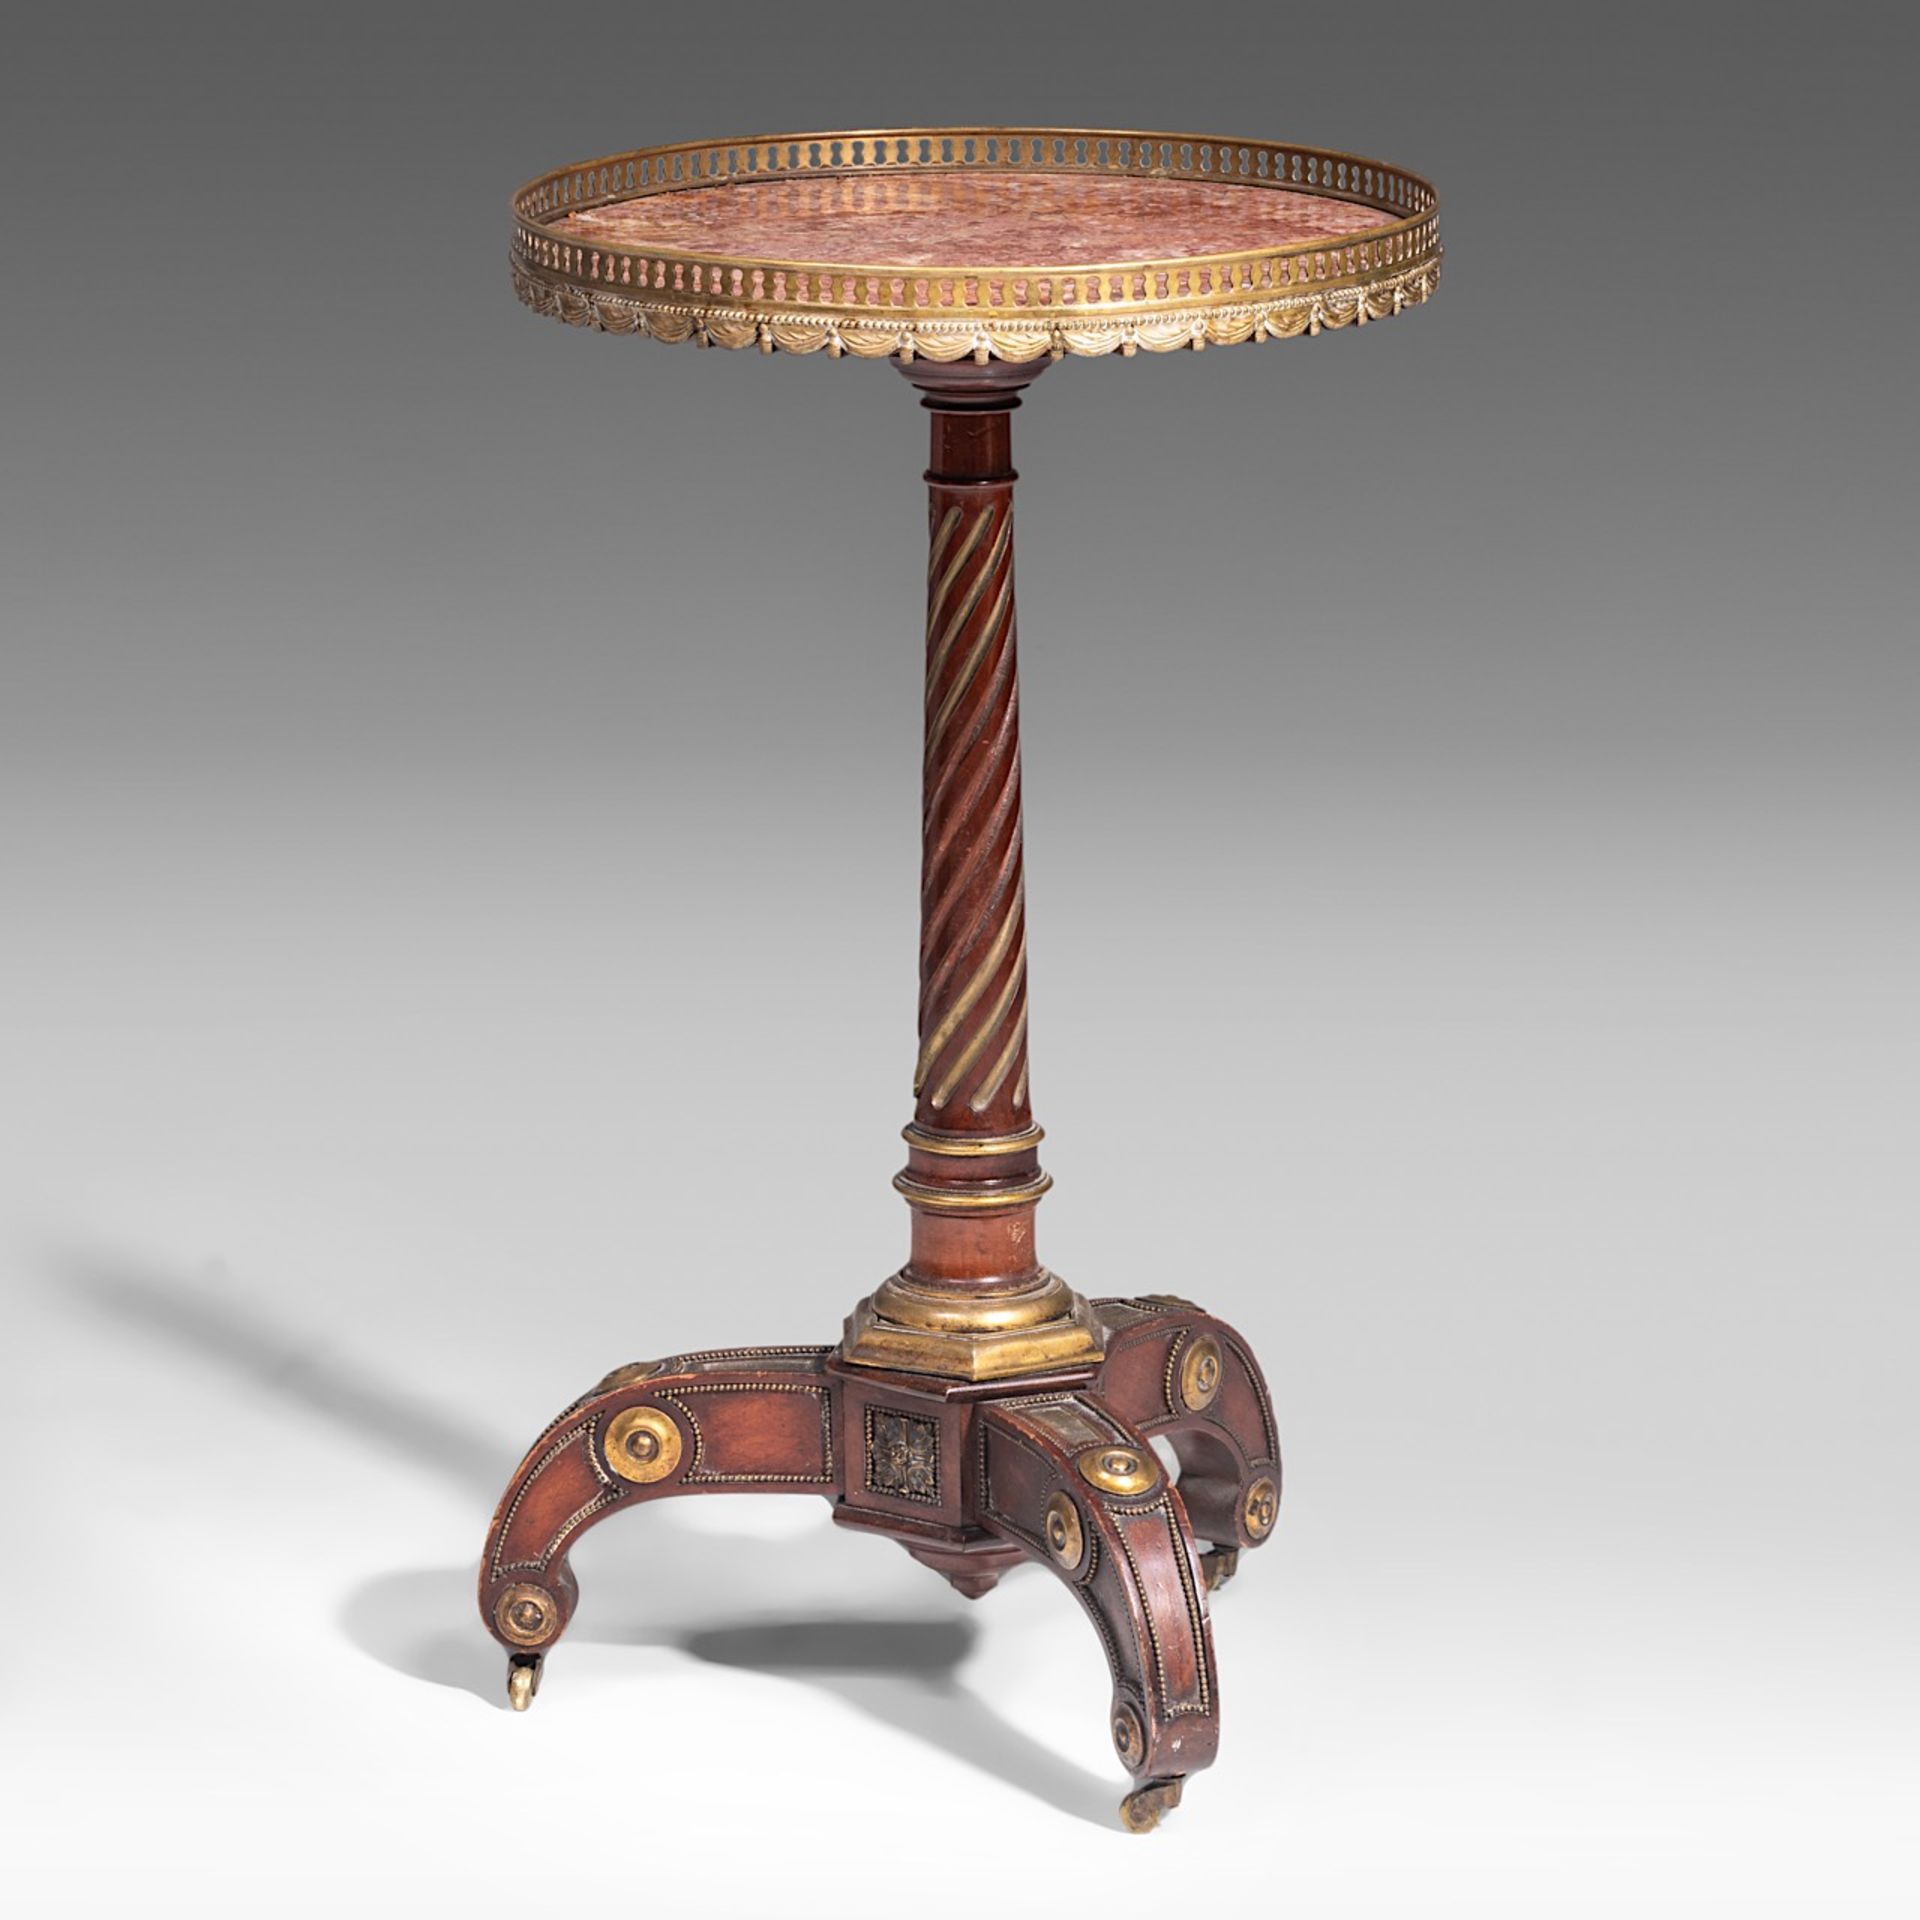 A fine Louis XVI mahogany gueridon attributed to Charles Erdman Richter, H 76 - dia 45 cm - Image 2 of 4